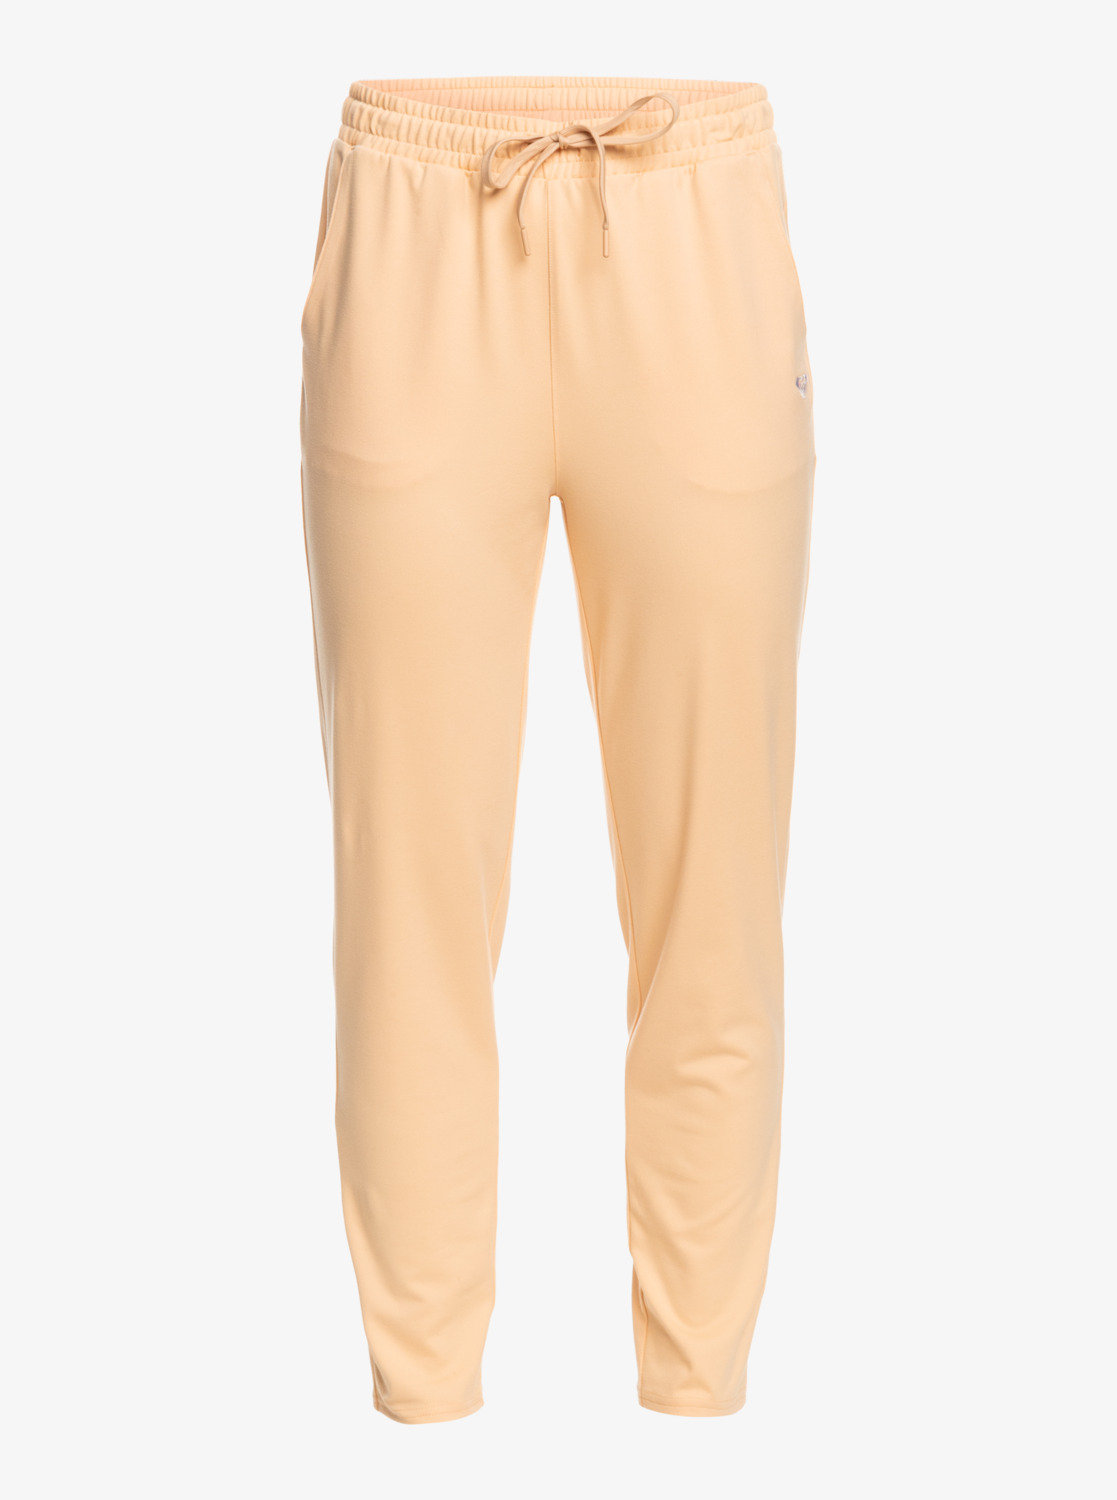 Roxy Rise & Vibe Sports Trousers W Velikost: S